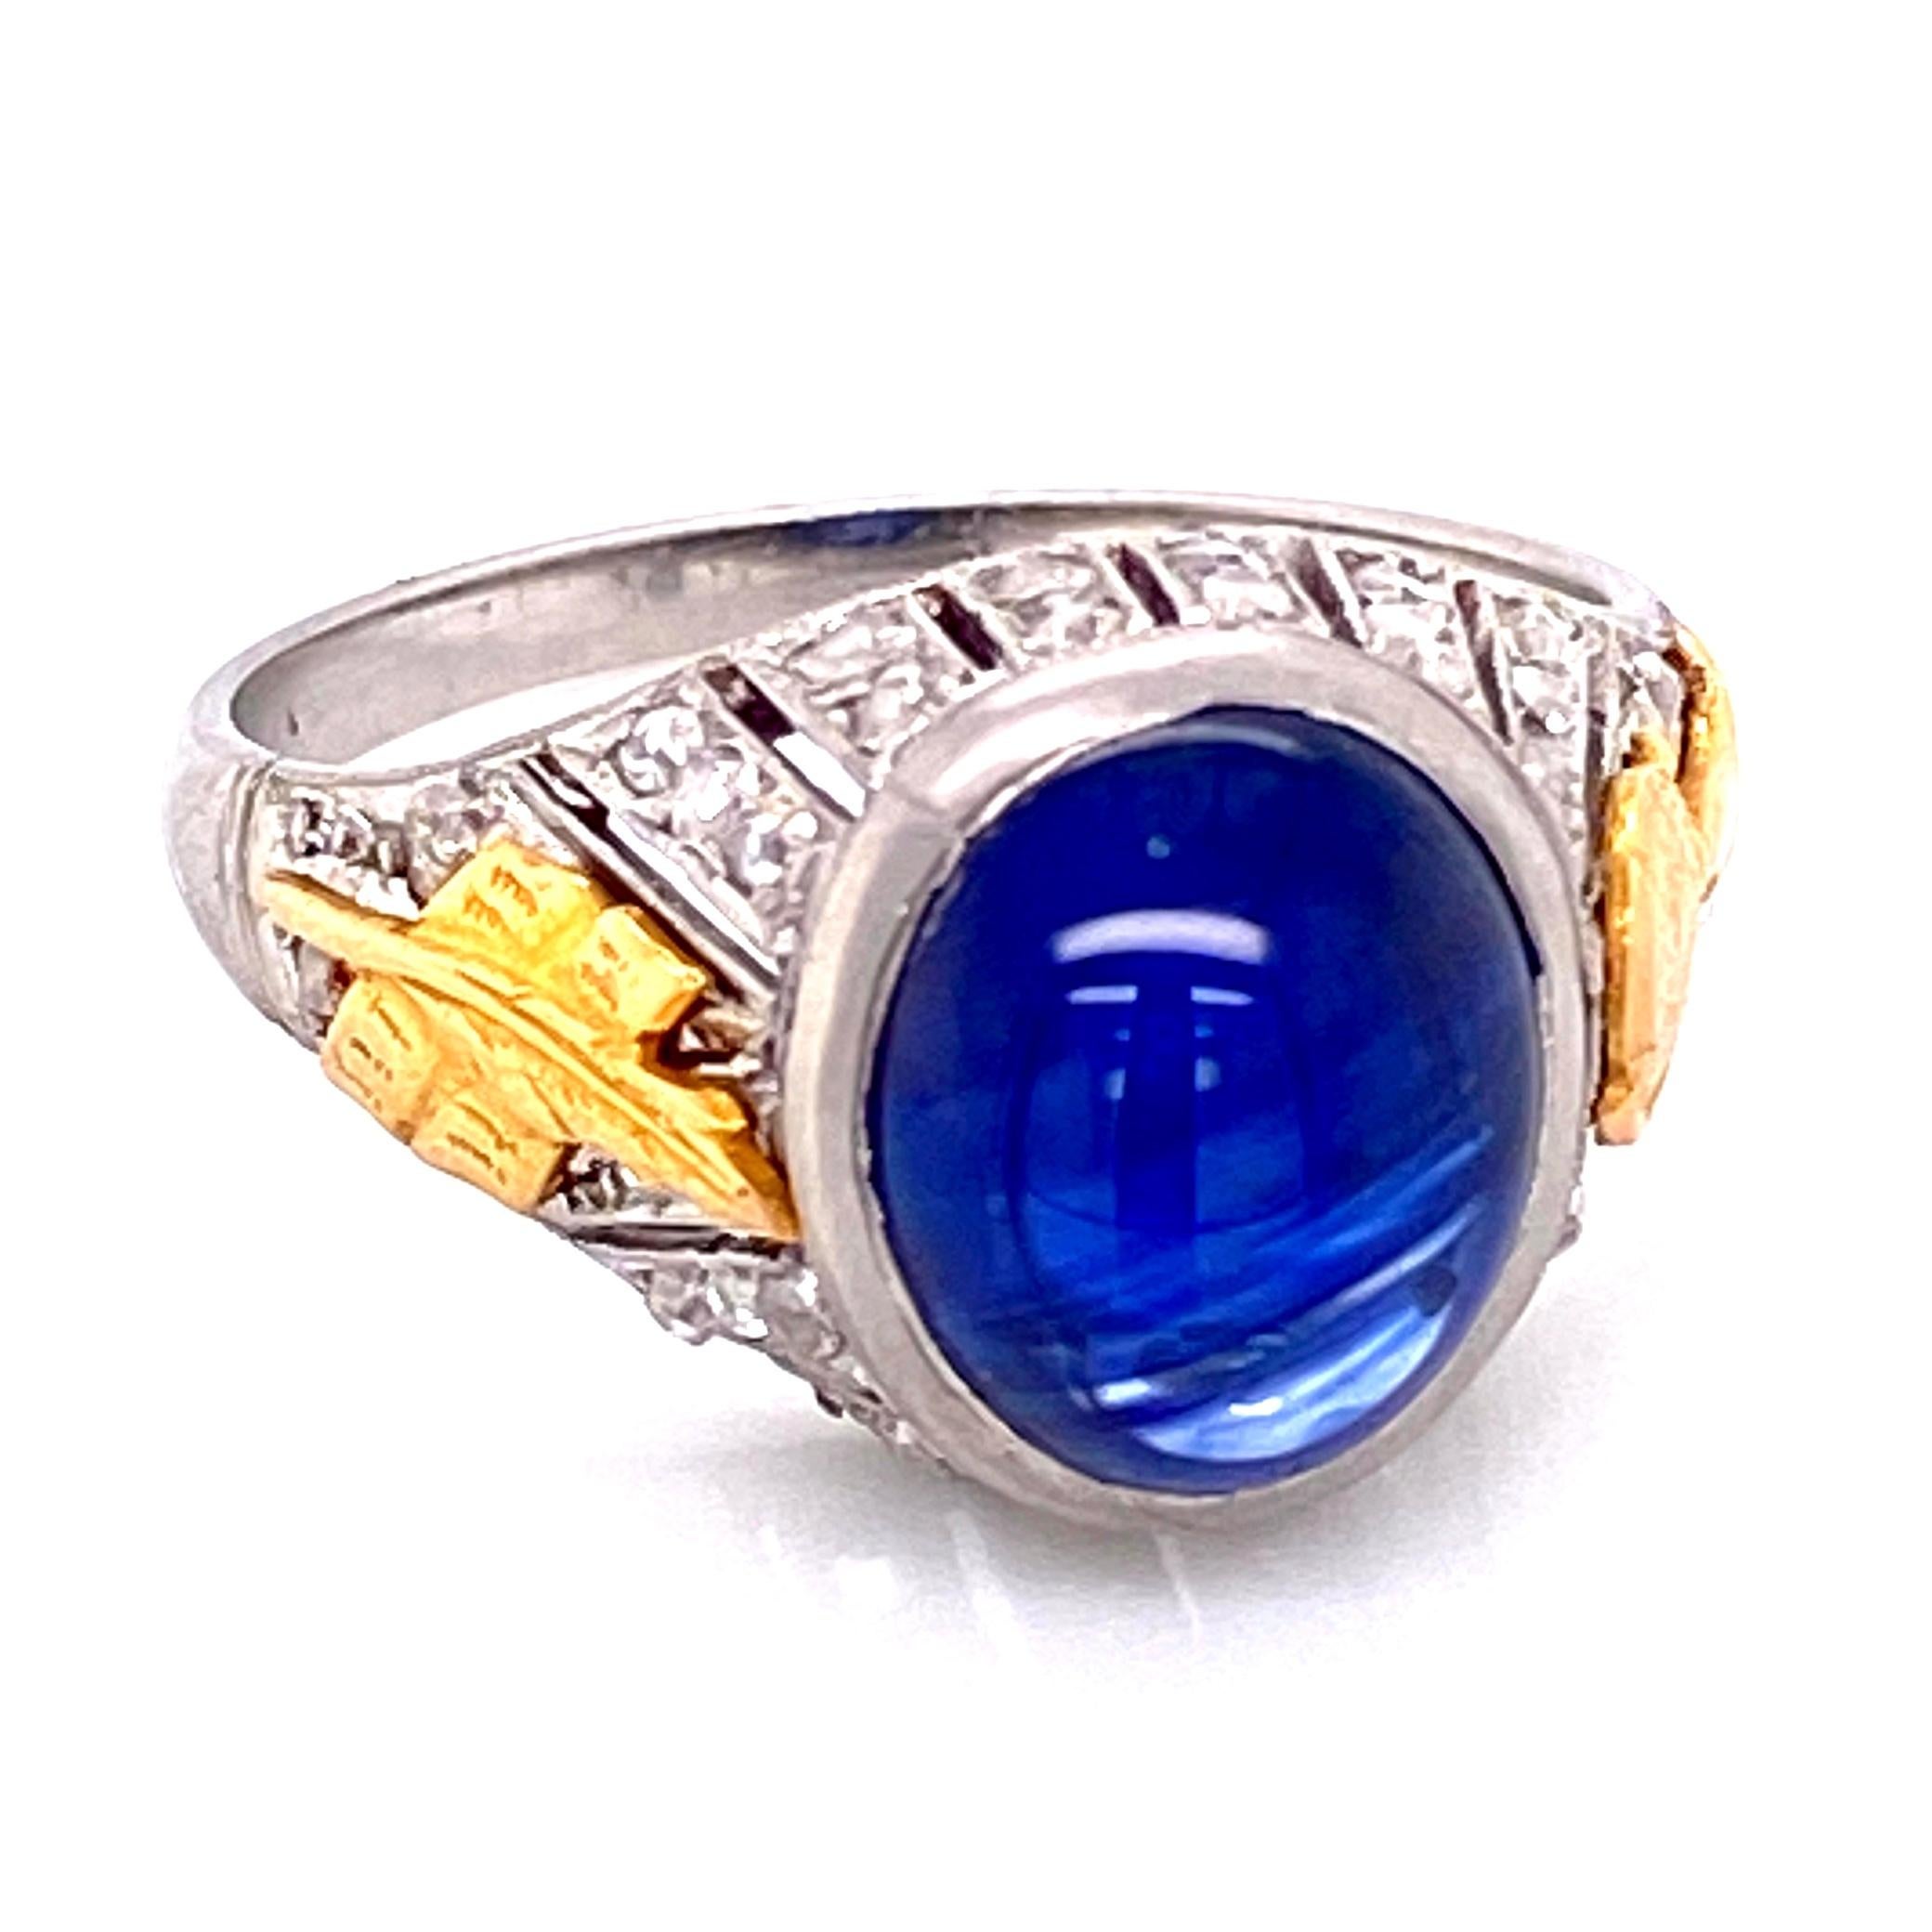 Simply Beautiful! Finely detailed Sapphire and Diamond Cocktail Ring, center securely Bezel set with a cabochon Blue Sapphire weighing approx. 4.50 Carat enhanced with rose cut side diamonds weighing about 0.30tcw. Accented in Yellow Gold, on one